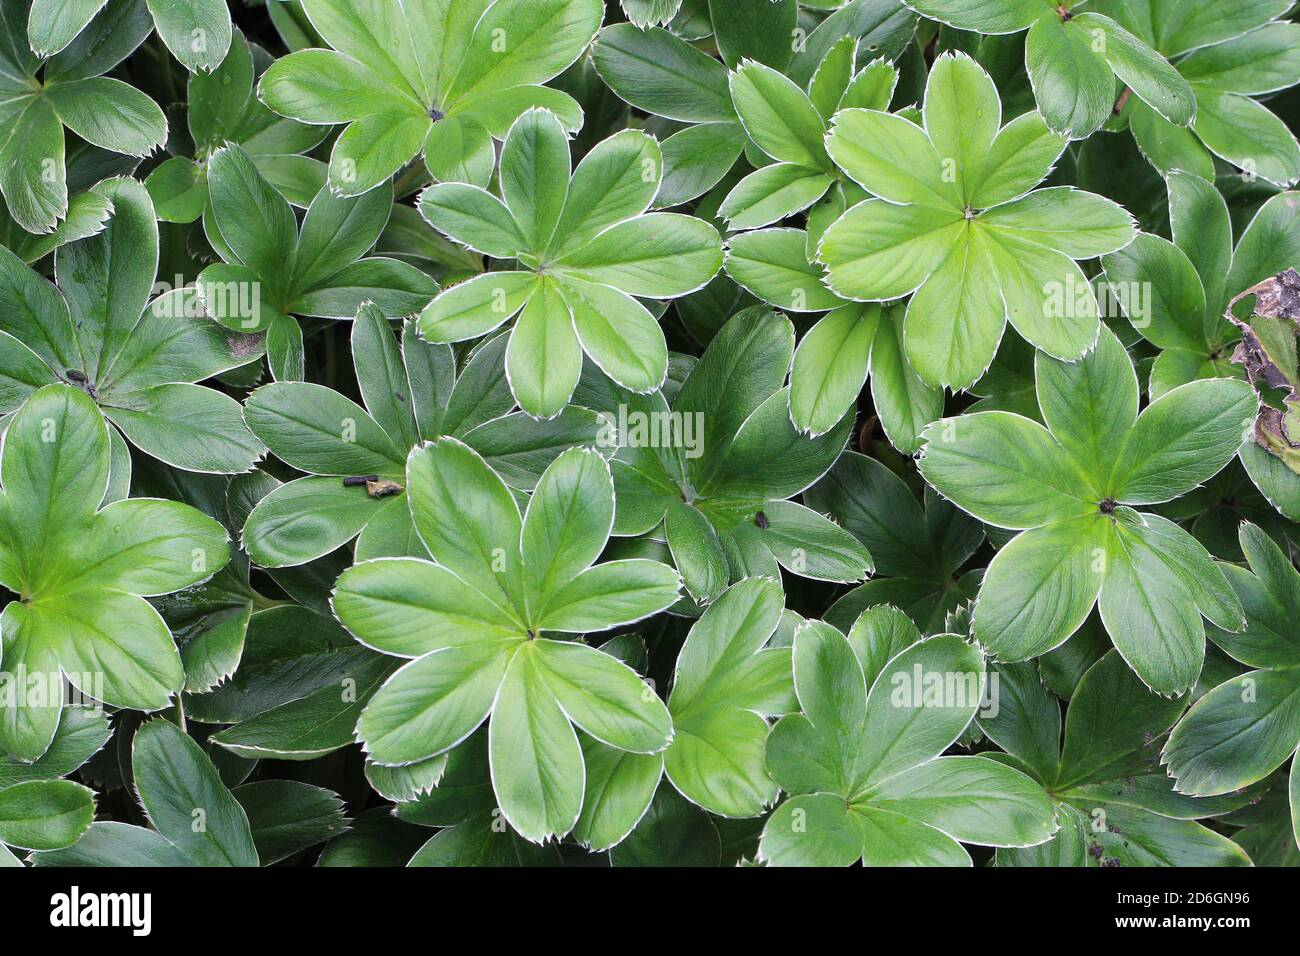 Closeup shot of green alpine lady's-mantle plant leaves Stock Photo